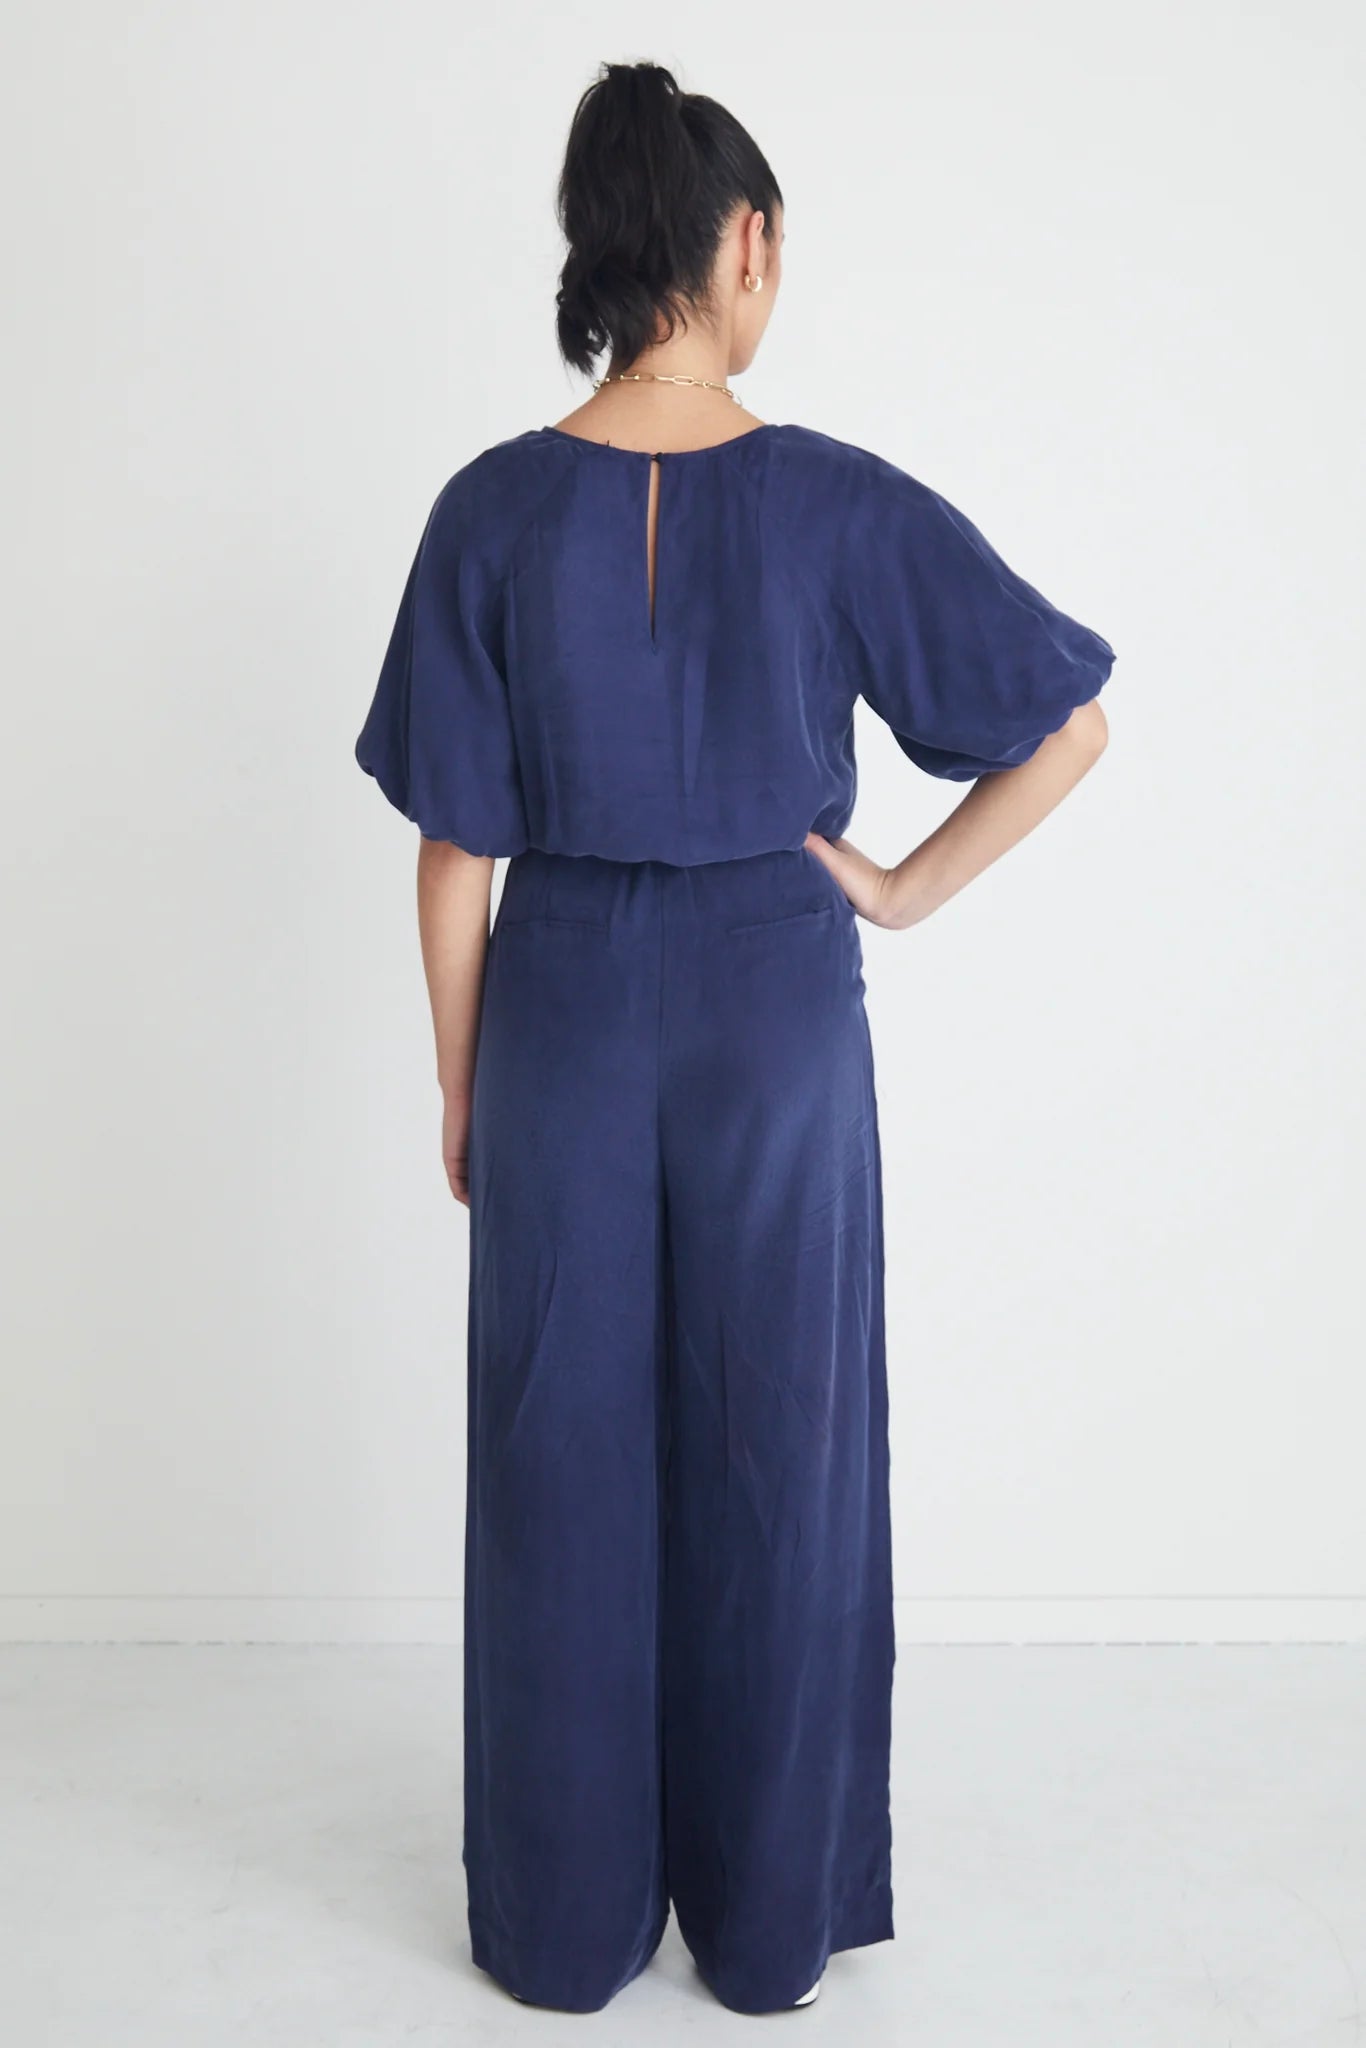 Vice Blue Cupro Pleat Front Manstyle Wide Pant